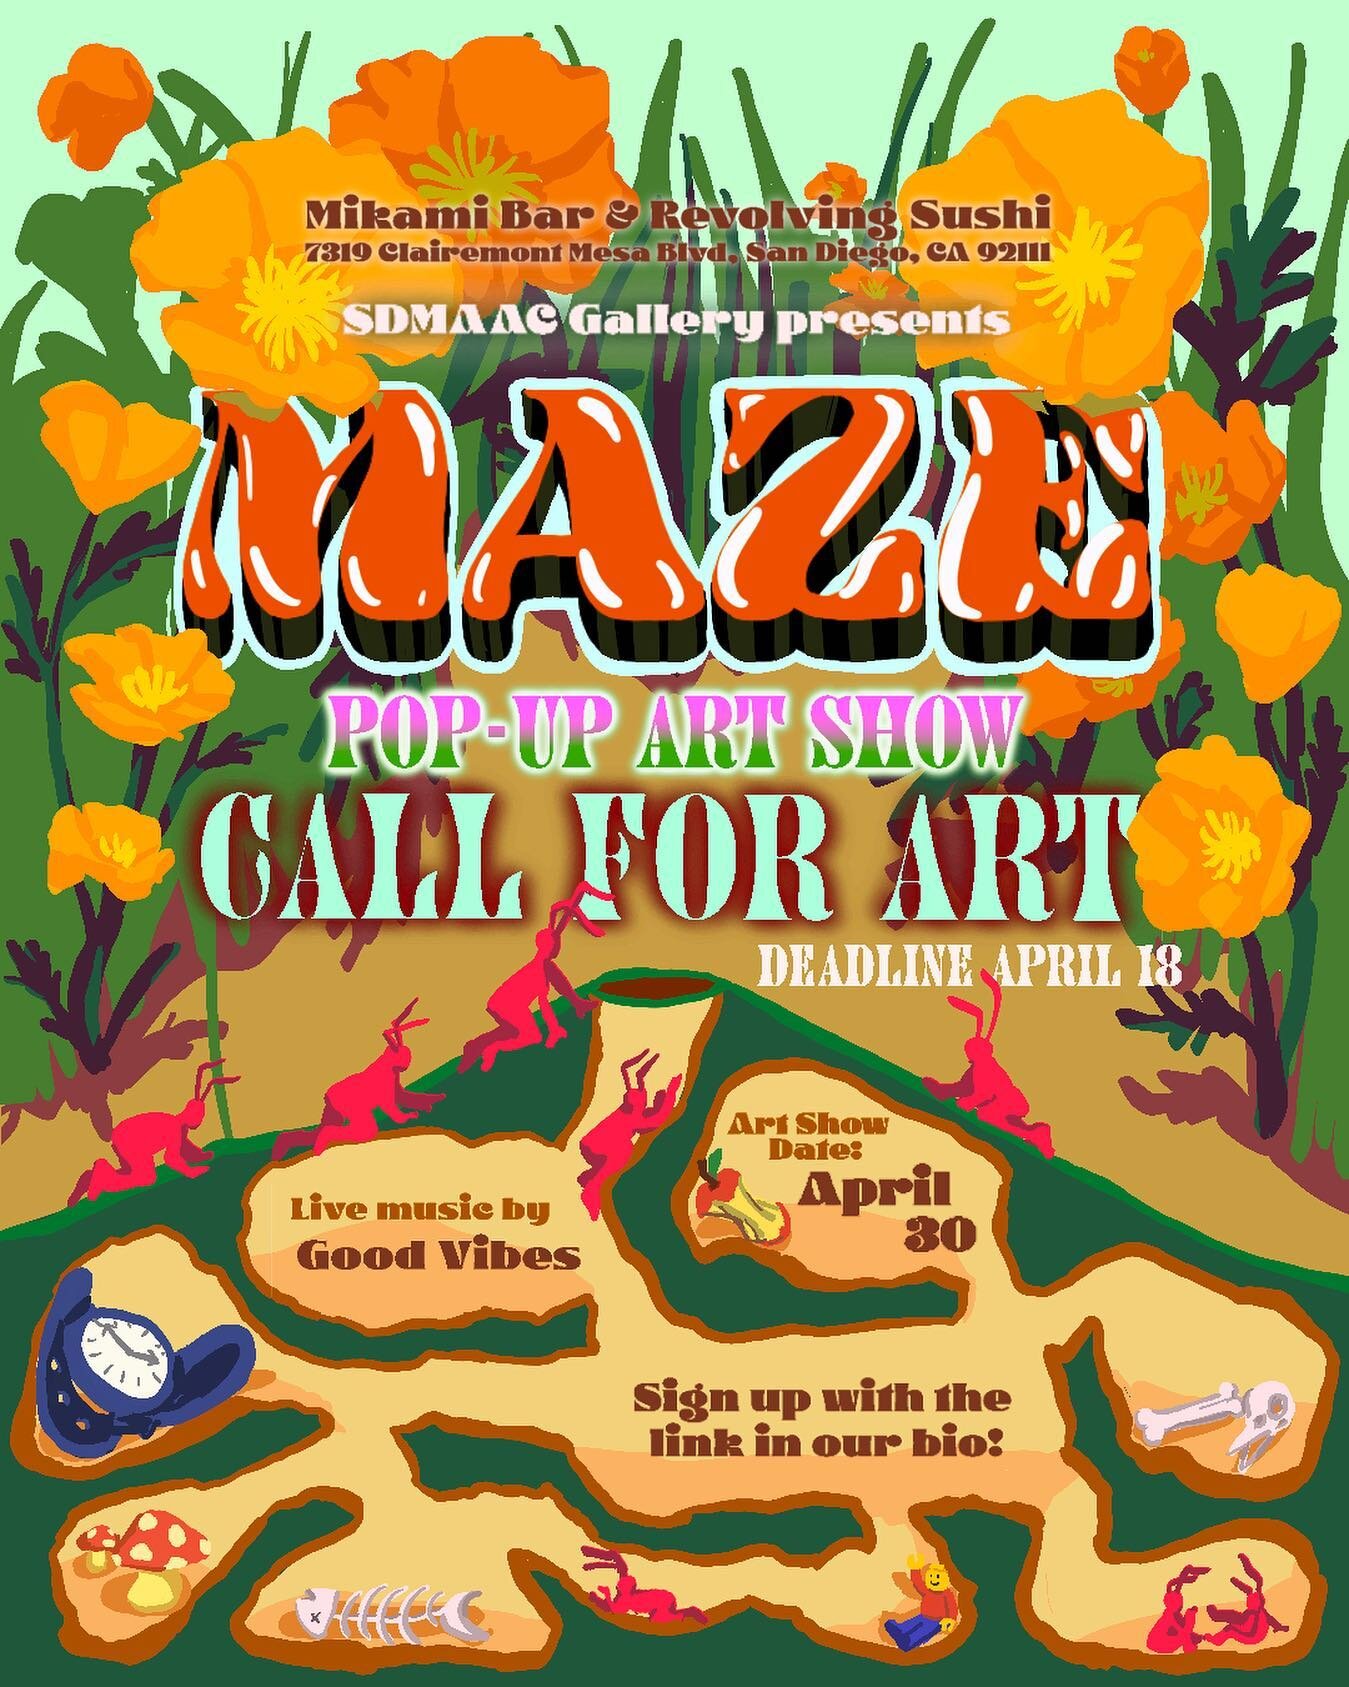 Hey Artists! Calling for art for SDMAAC Gallery&rsquo;s MAZE Pop Up Art Show event at Mikami Bar &amp; Revolving Sushi @ on SAT, April 30th from 6-10pm.

Join this opportunity as we make a night of showcasing original art, prints &amp; more by our ar